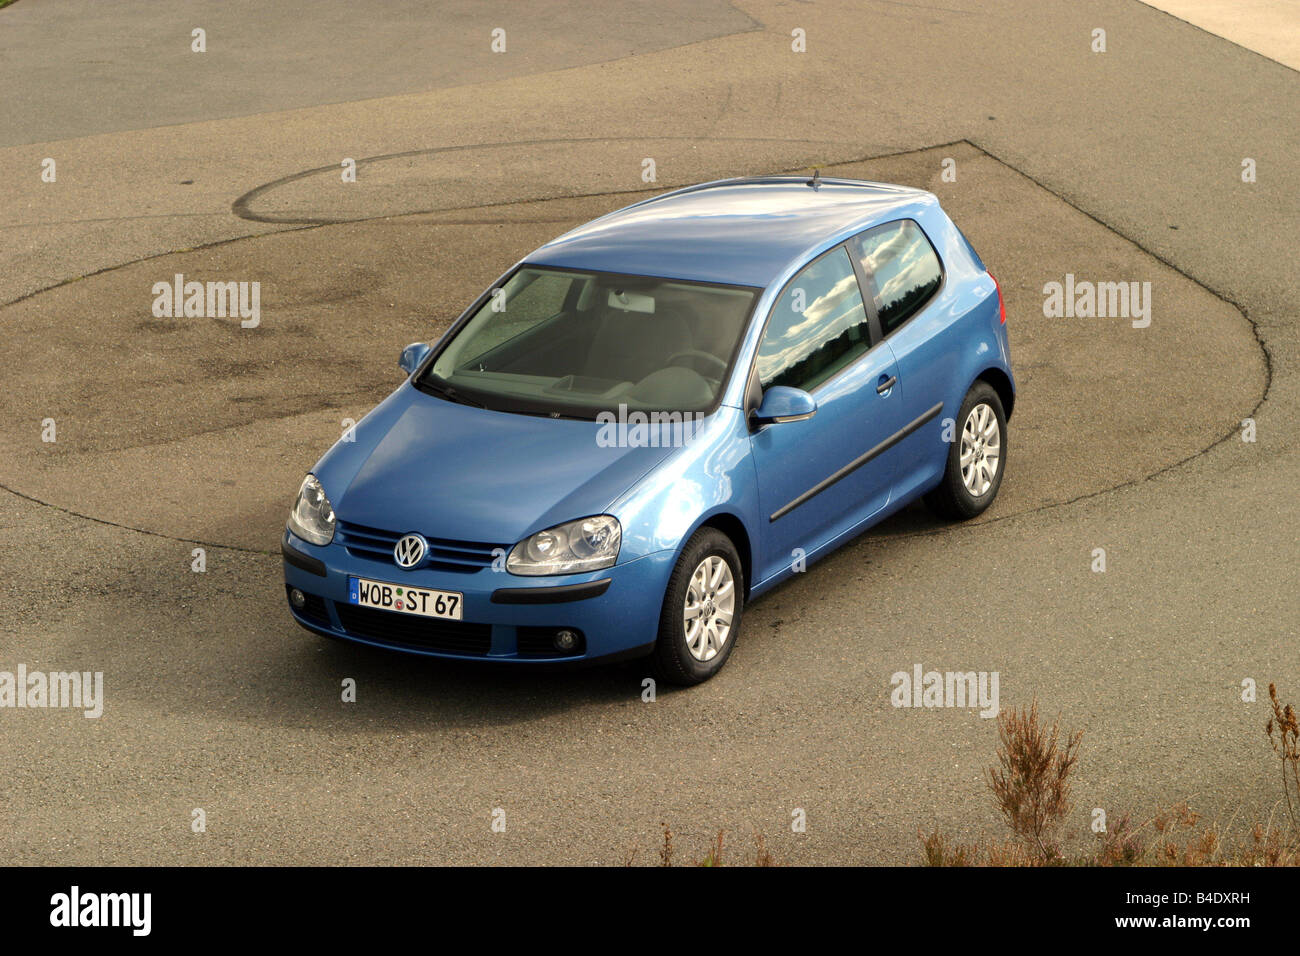 Car, VW Volkswagen Golf V 1.9 TDI, Lower middle-sized class, model year 2003-, metallic-blue, Limousine, FGHDS, standing, uphold Stock Photo